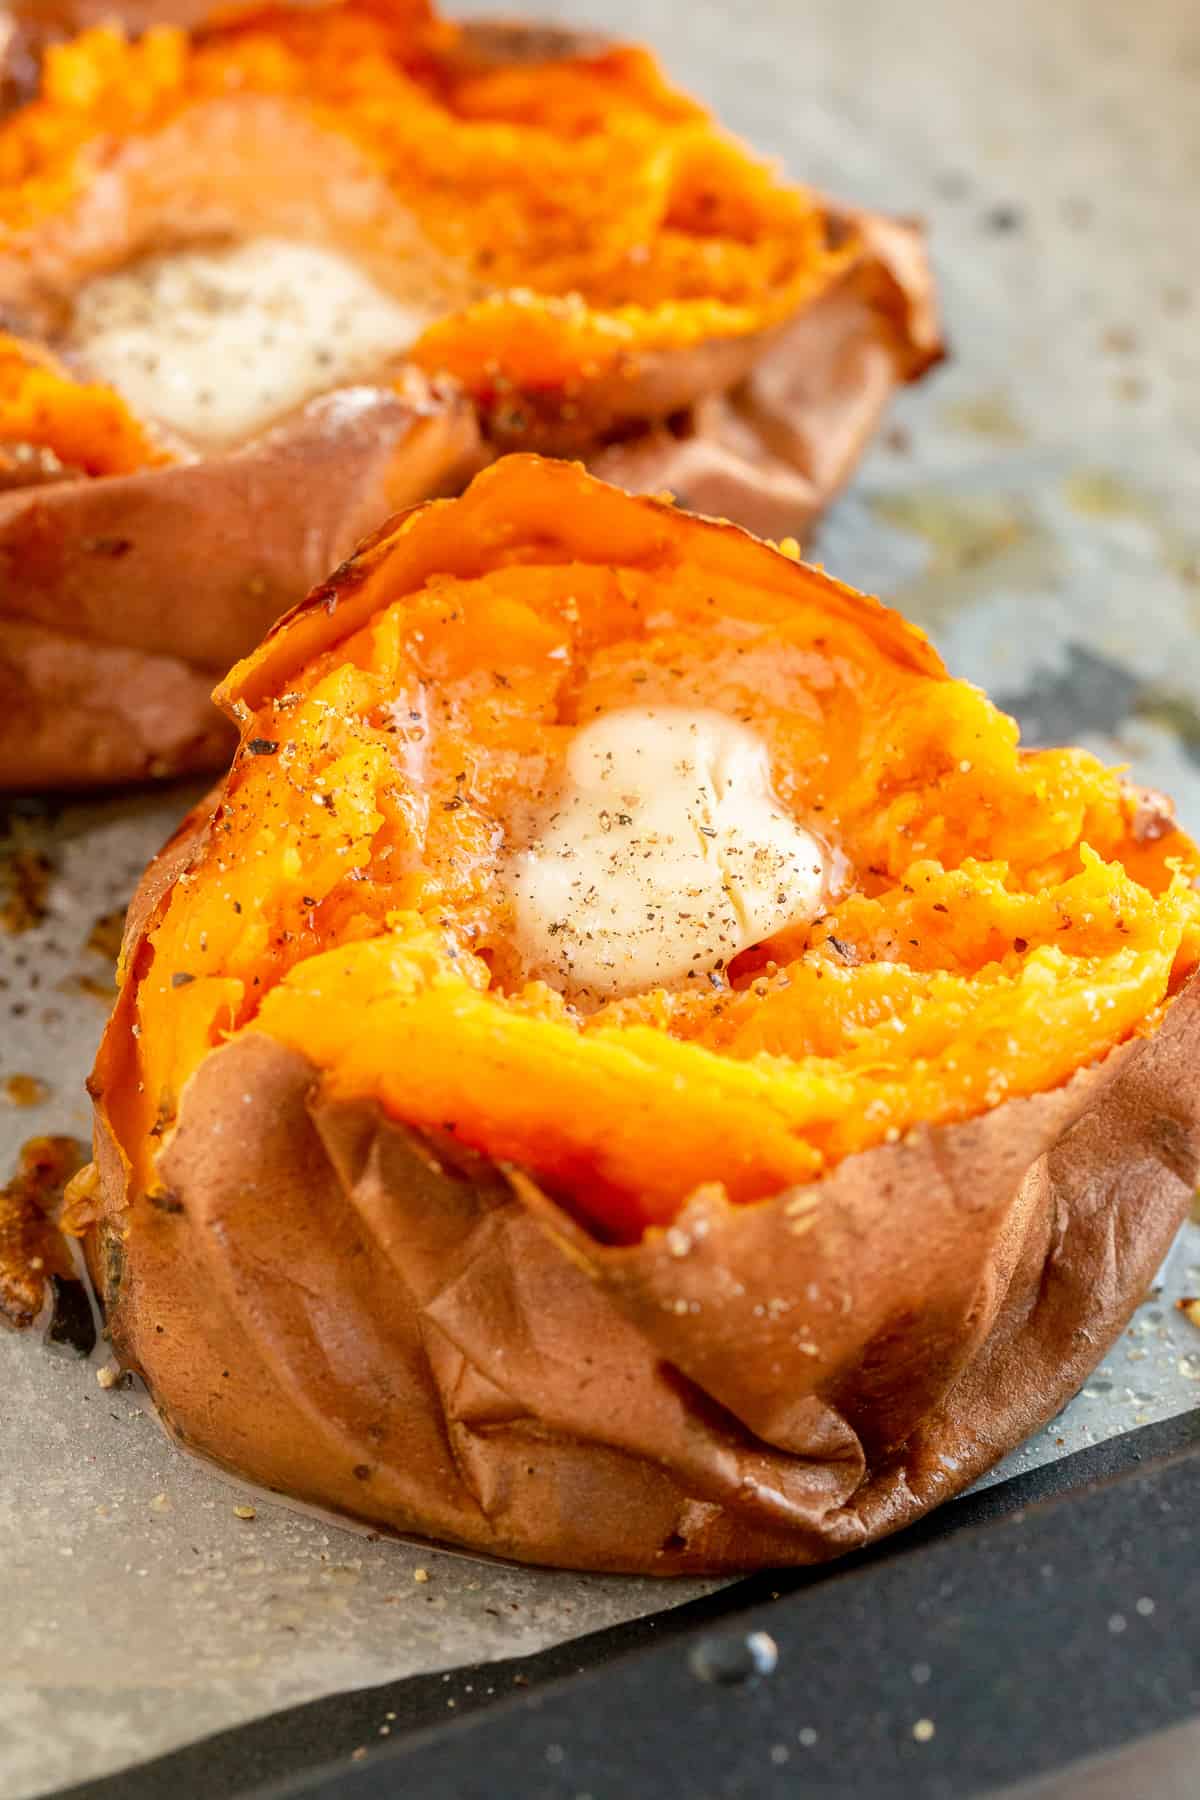 A close up of a sweet potato topped with butter.